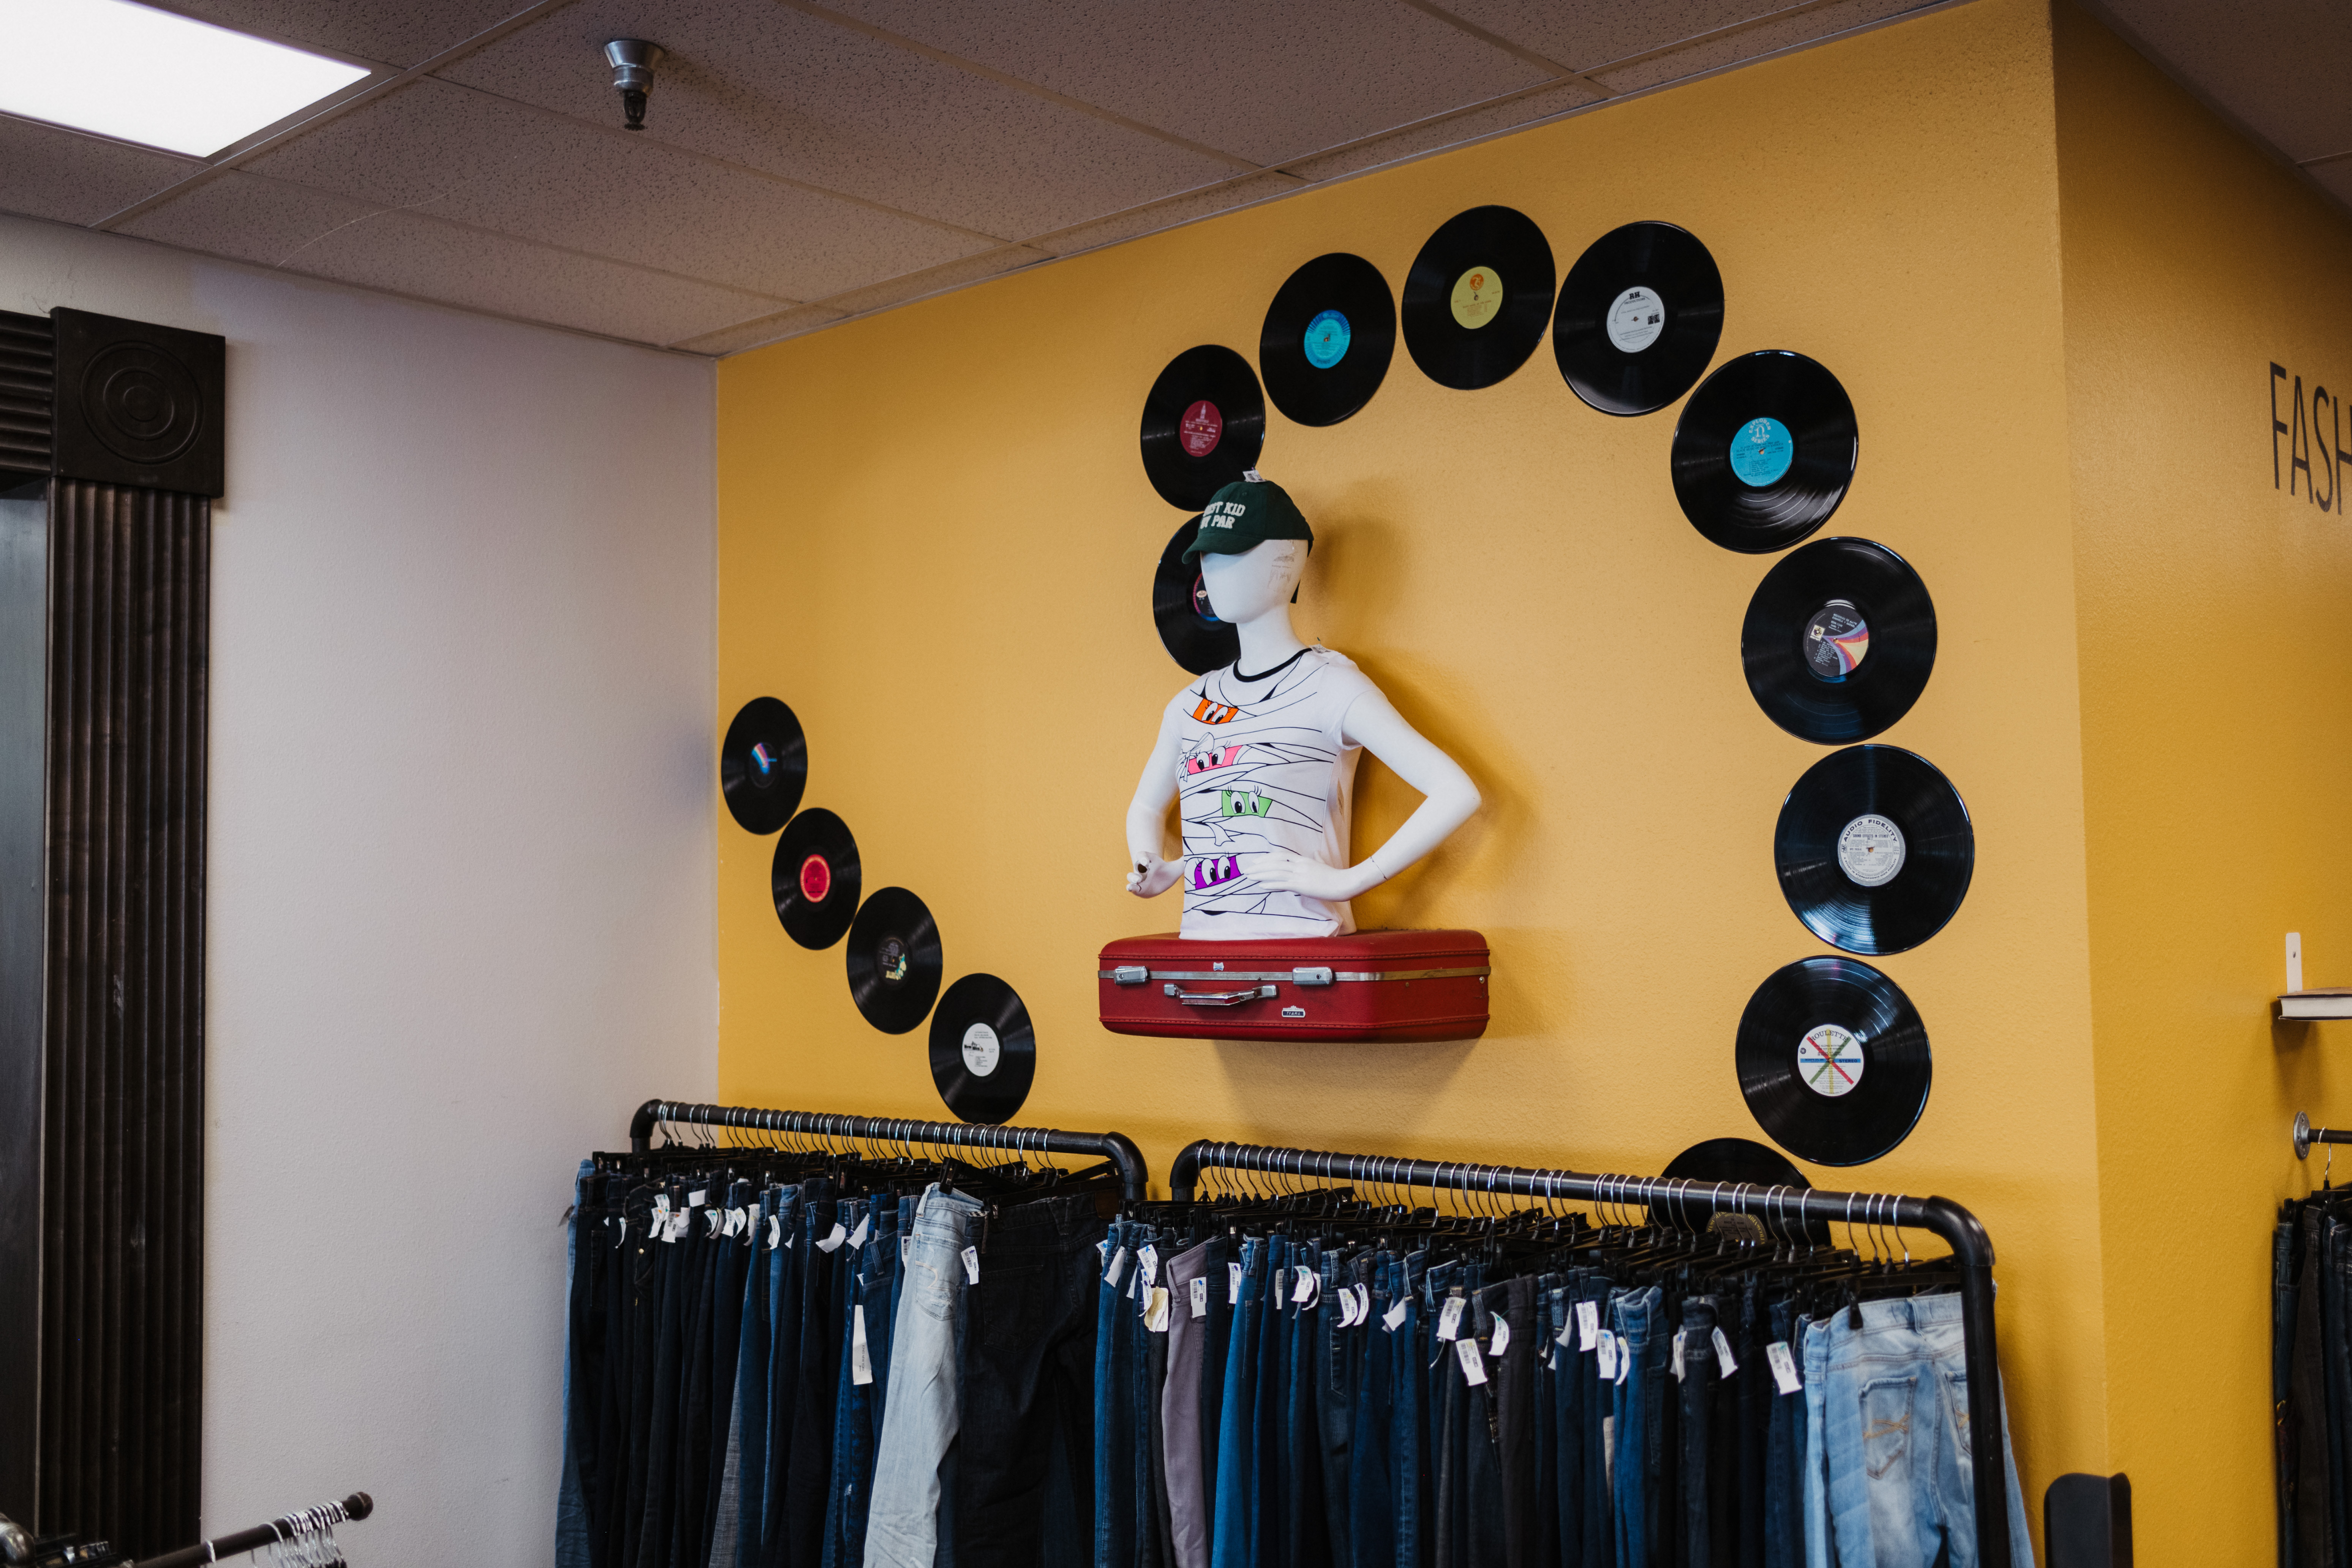 suitcase with mannequins on top and vinyl records decorating the walls